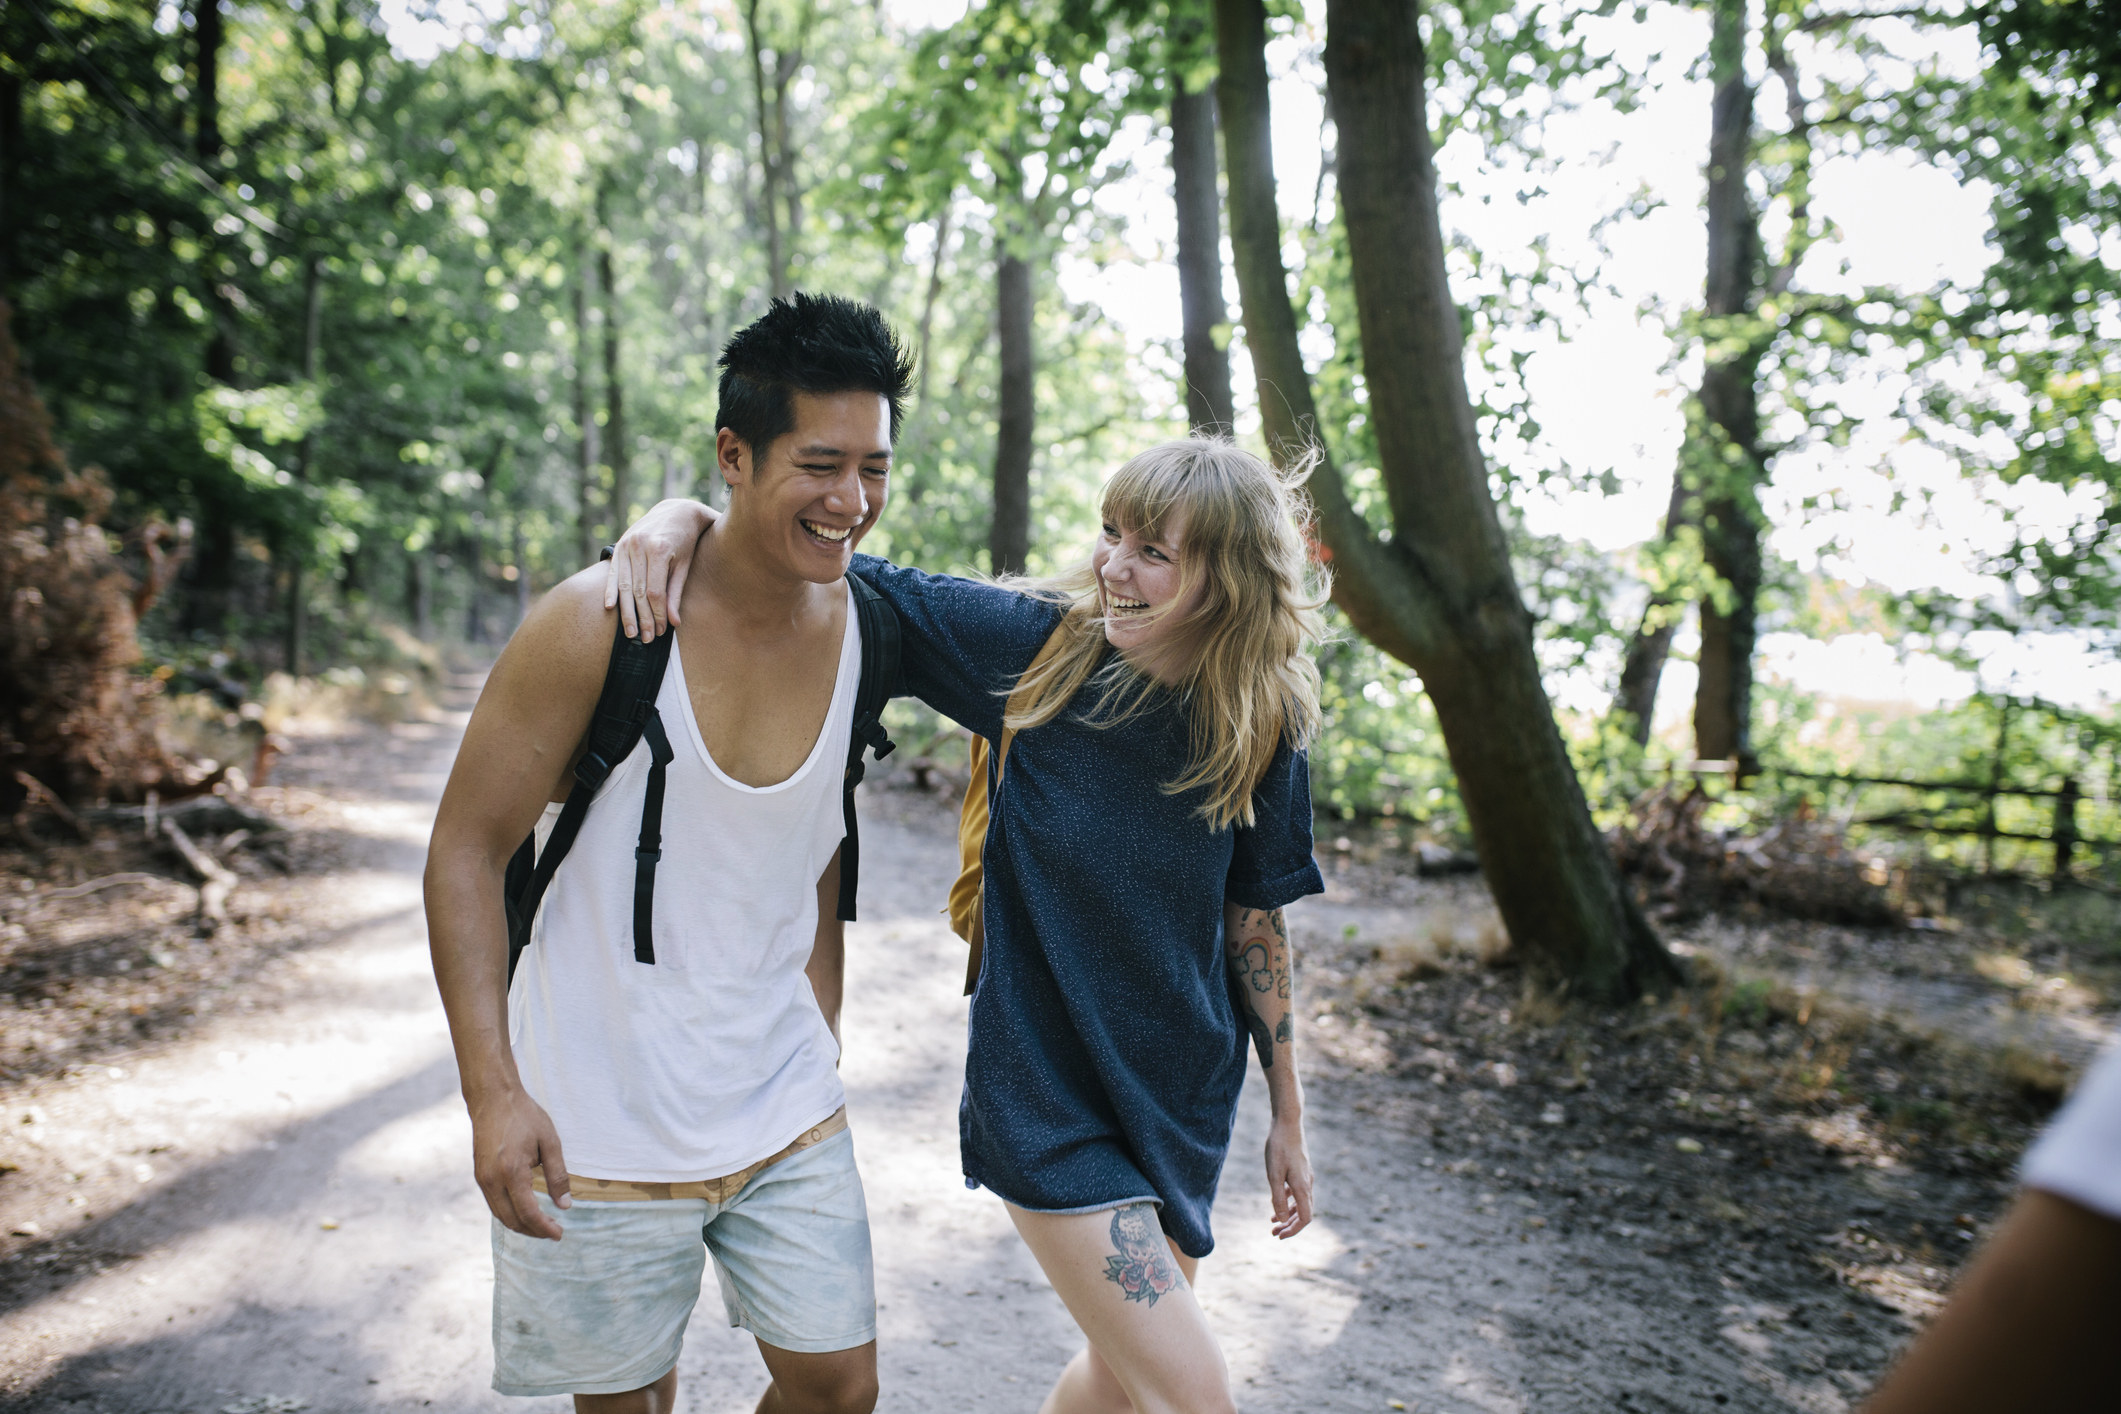 Young couple walking together in a park